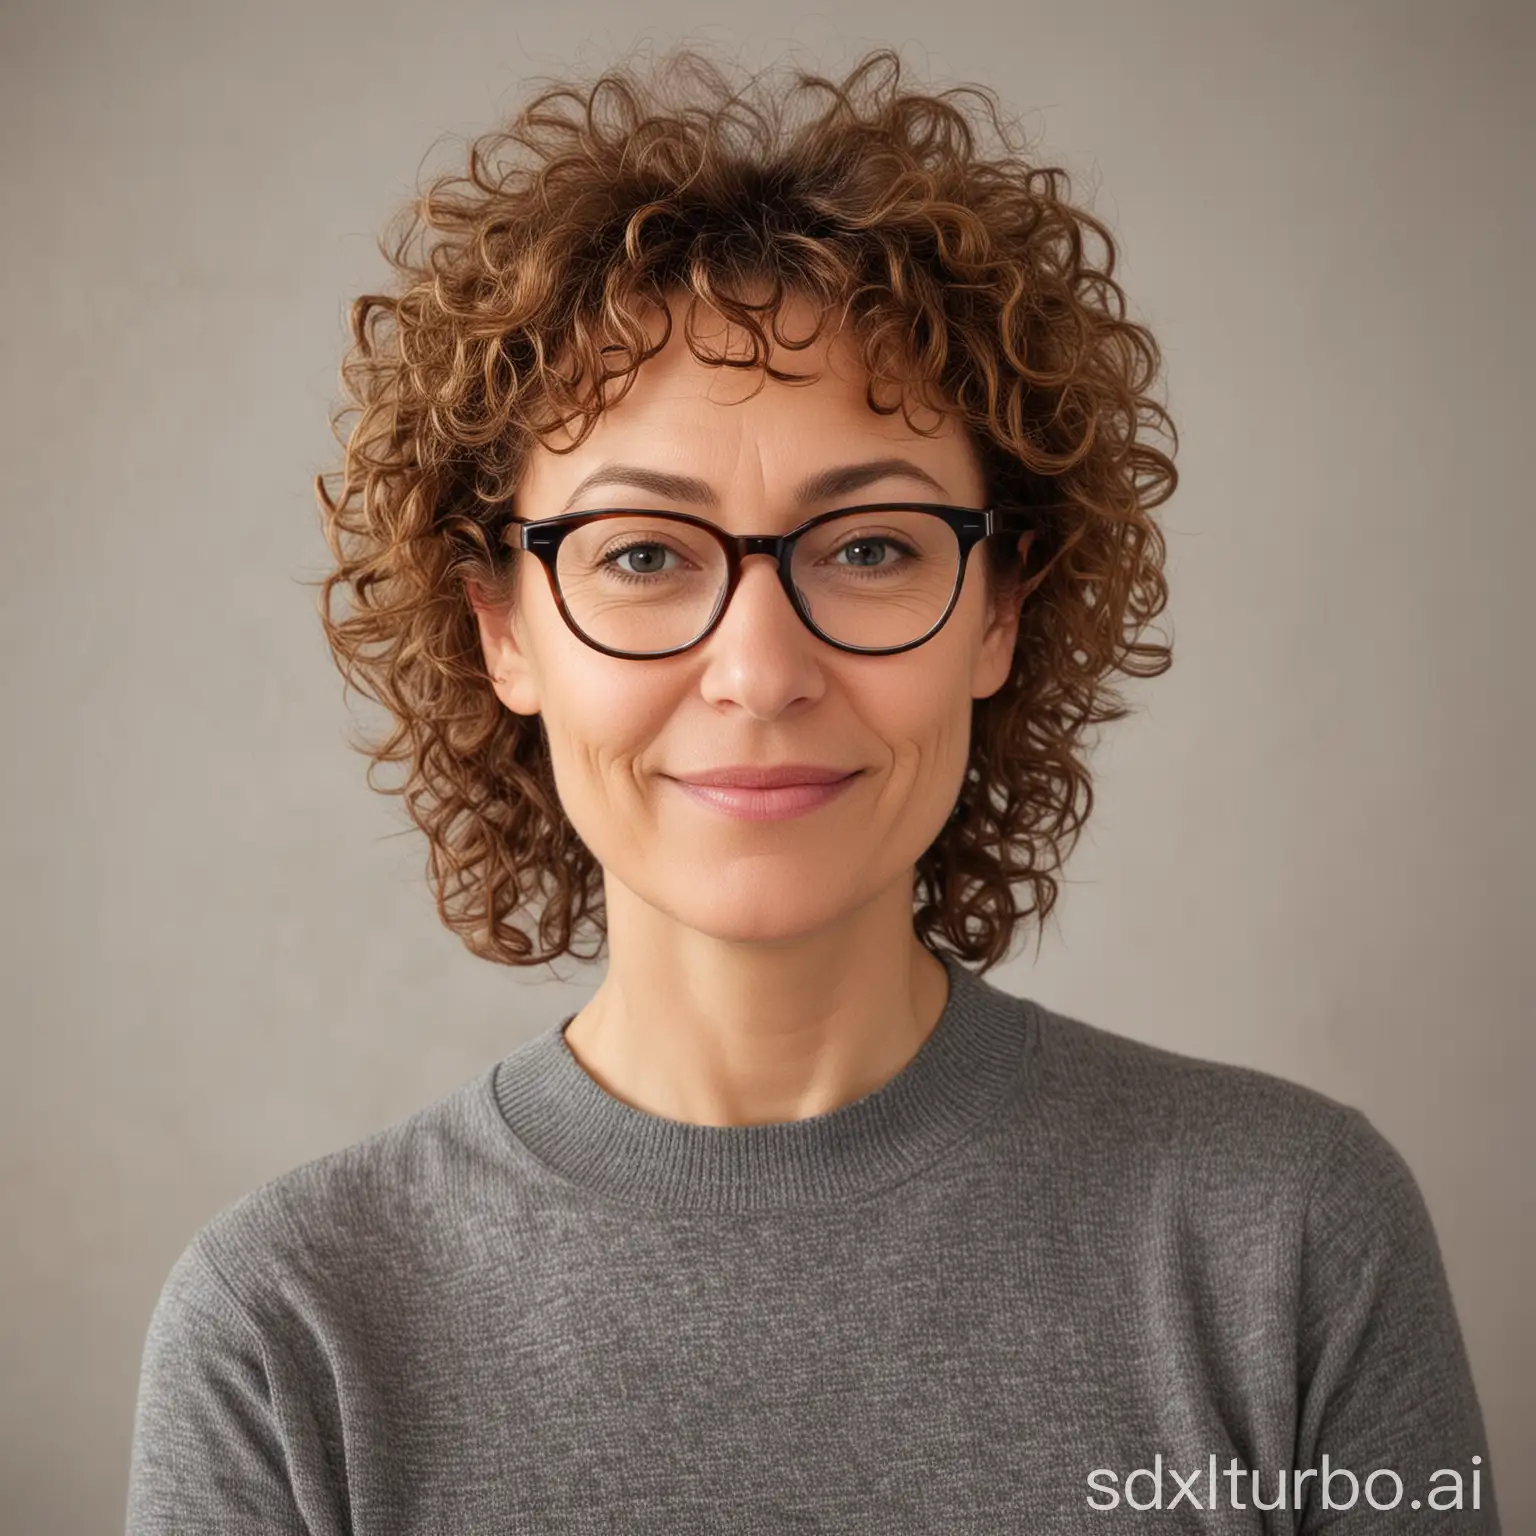 Lady, German, chestnut curly hair, 52 years old, horn-rimmed glasses, dimples, light skin impurities, half-close